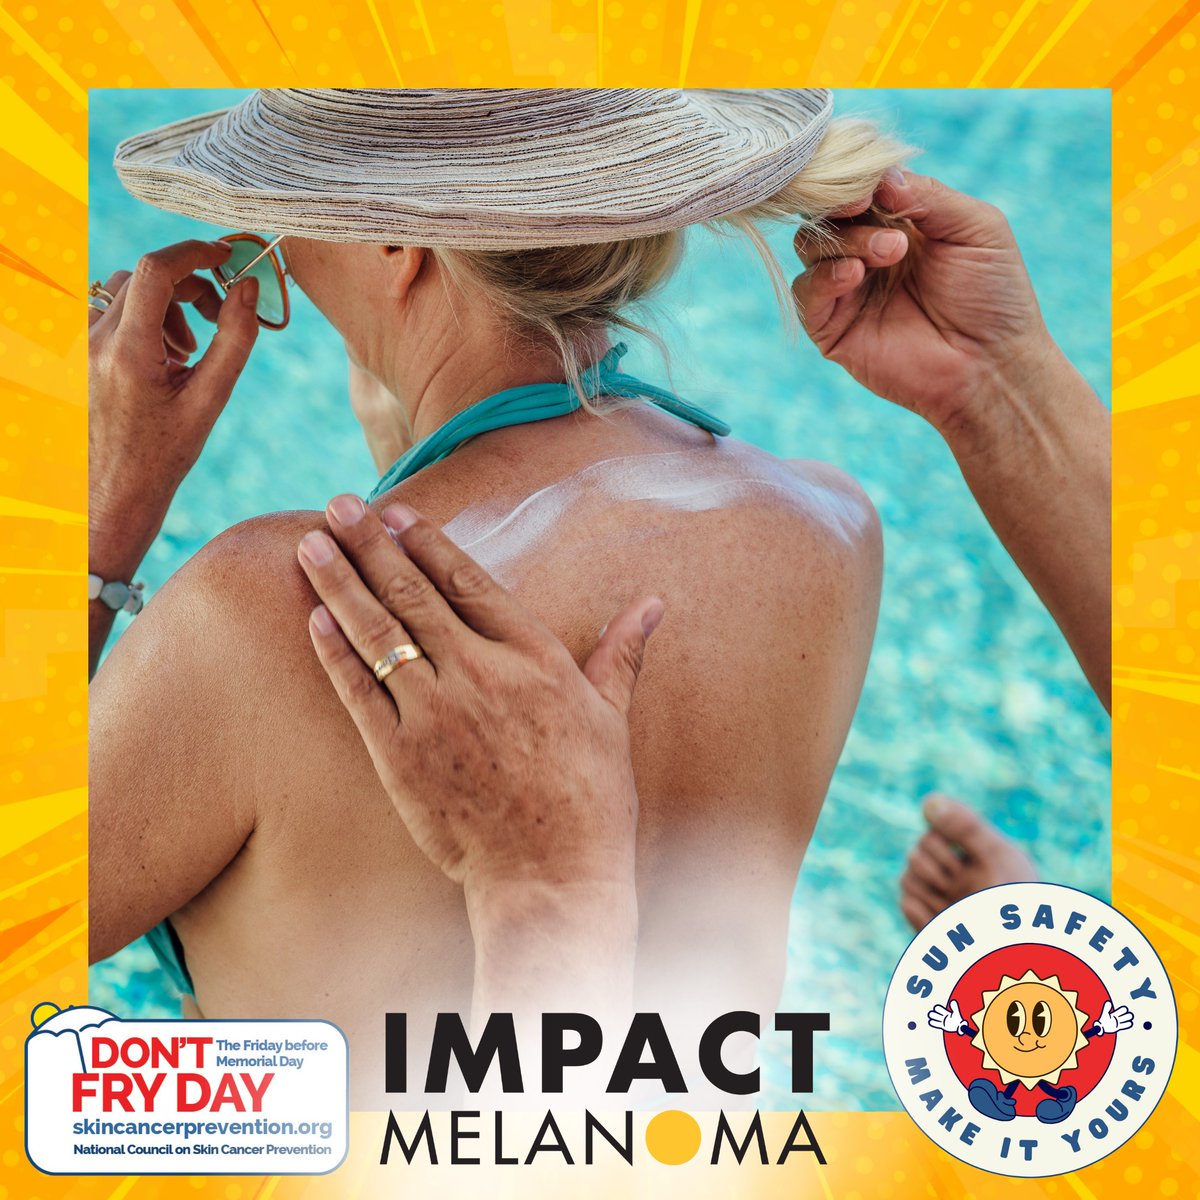 This #DontFryDay, let's remember to make #sunsafety part of your everyday routine! 

#DontFryDay #MelanomaAwarenessMonth #Melanoma #SkinCancer